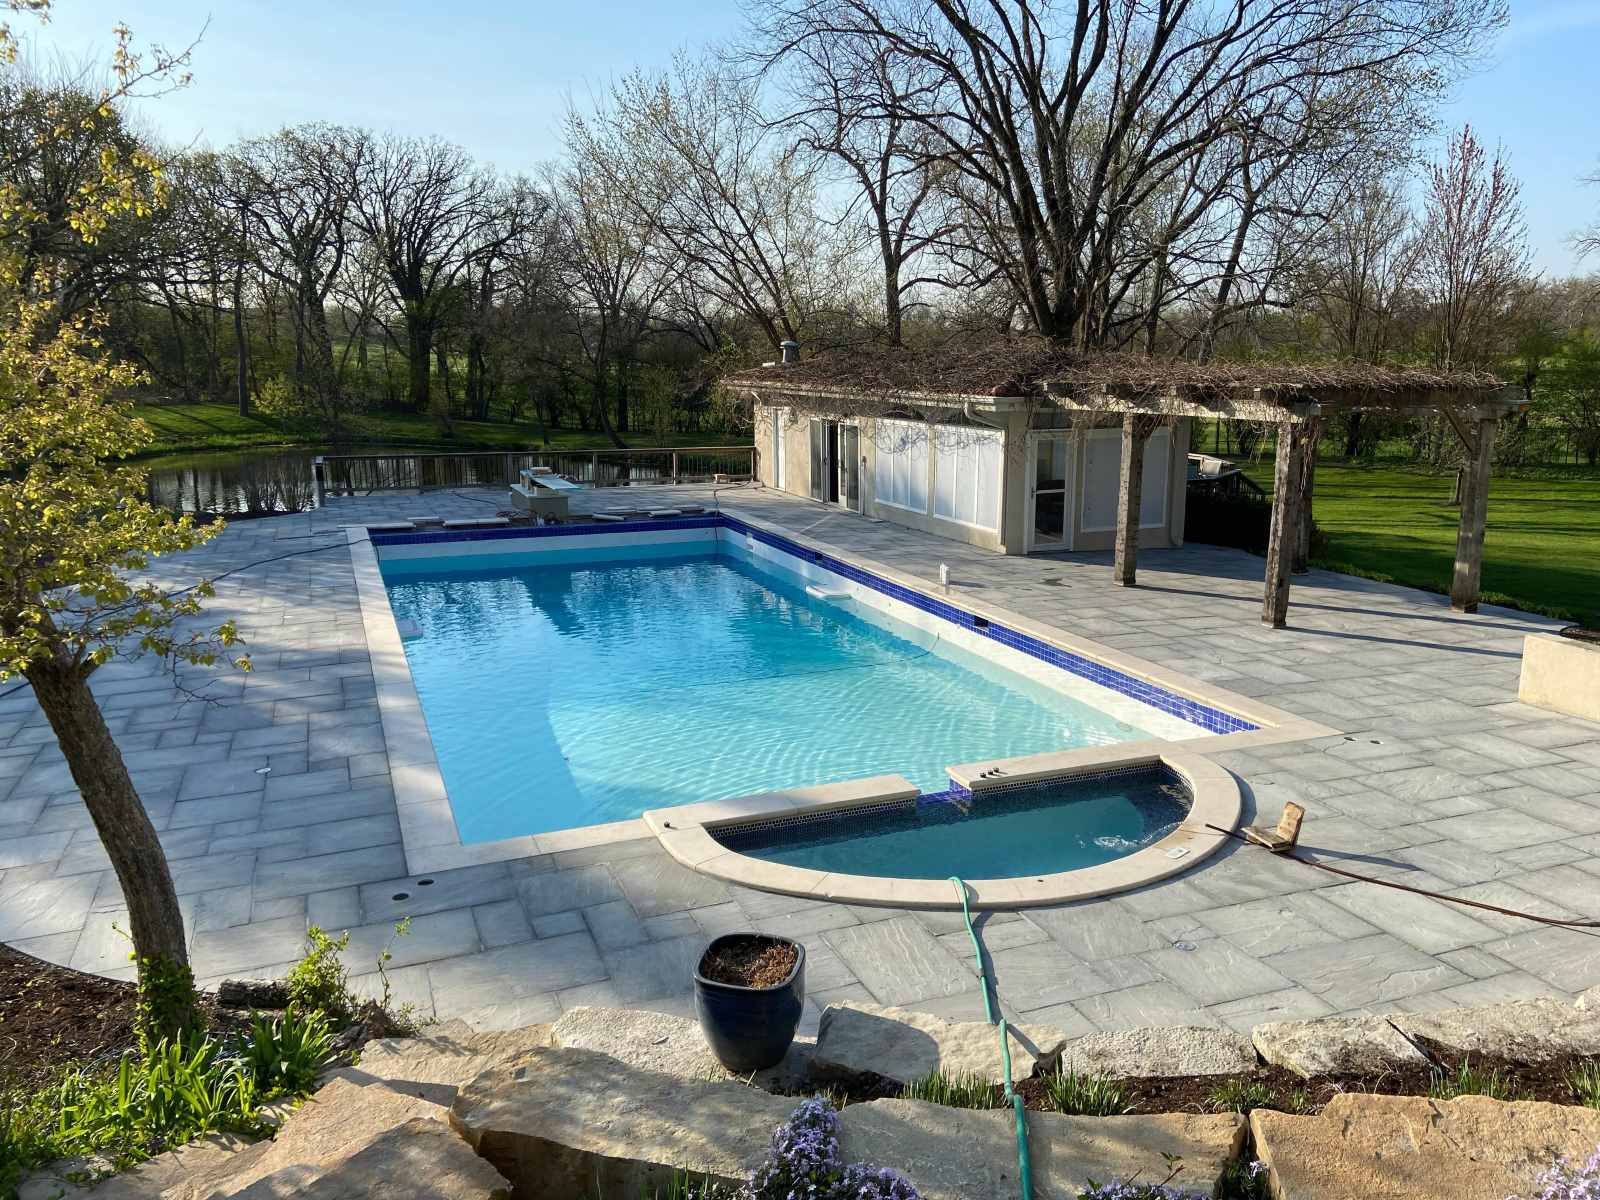 What To Do With An Unwanted Inground Swimming Pool